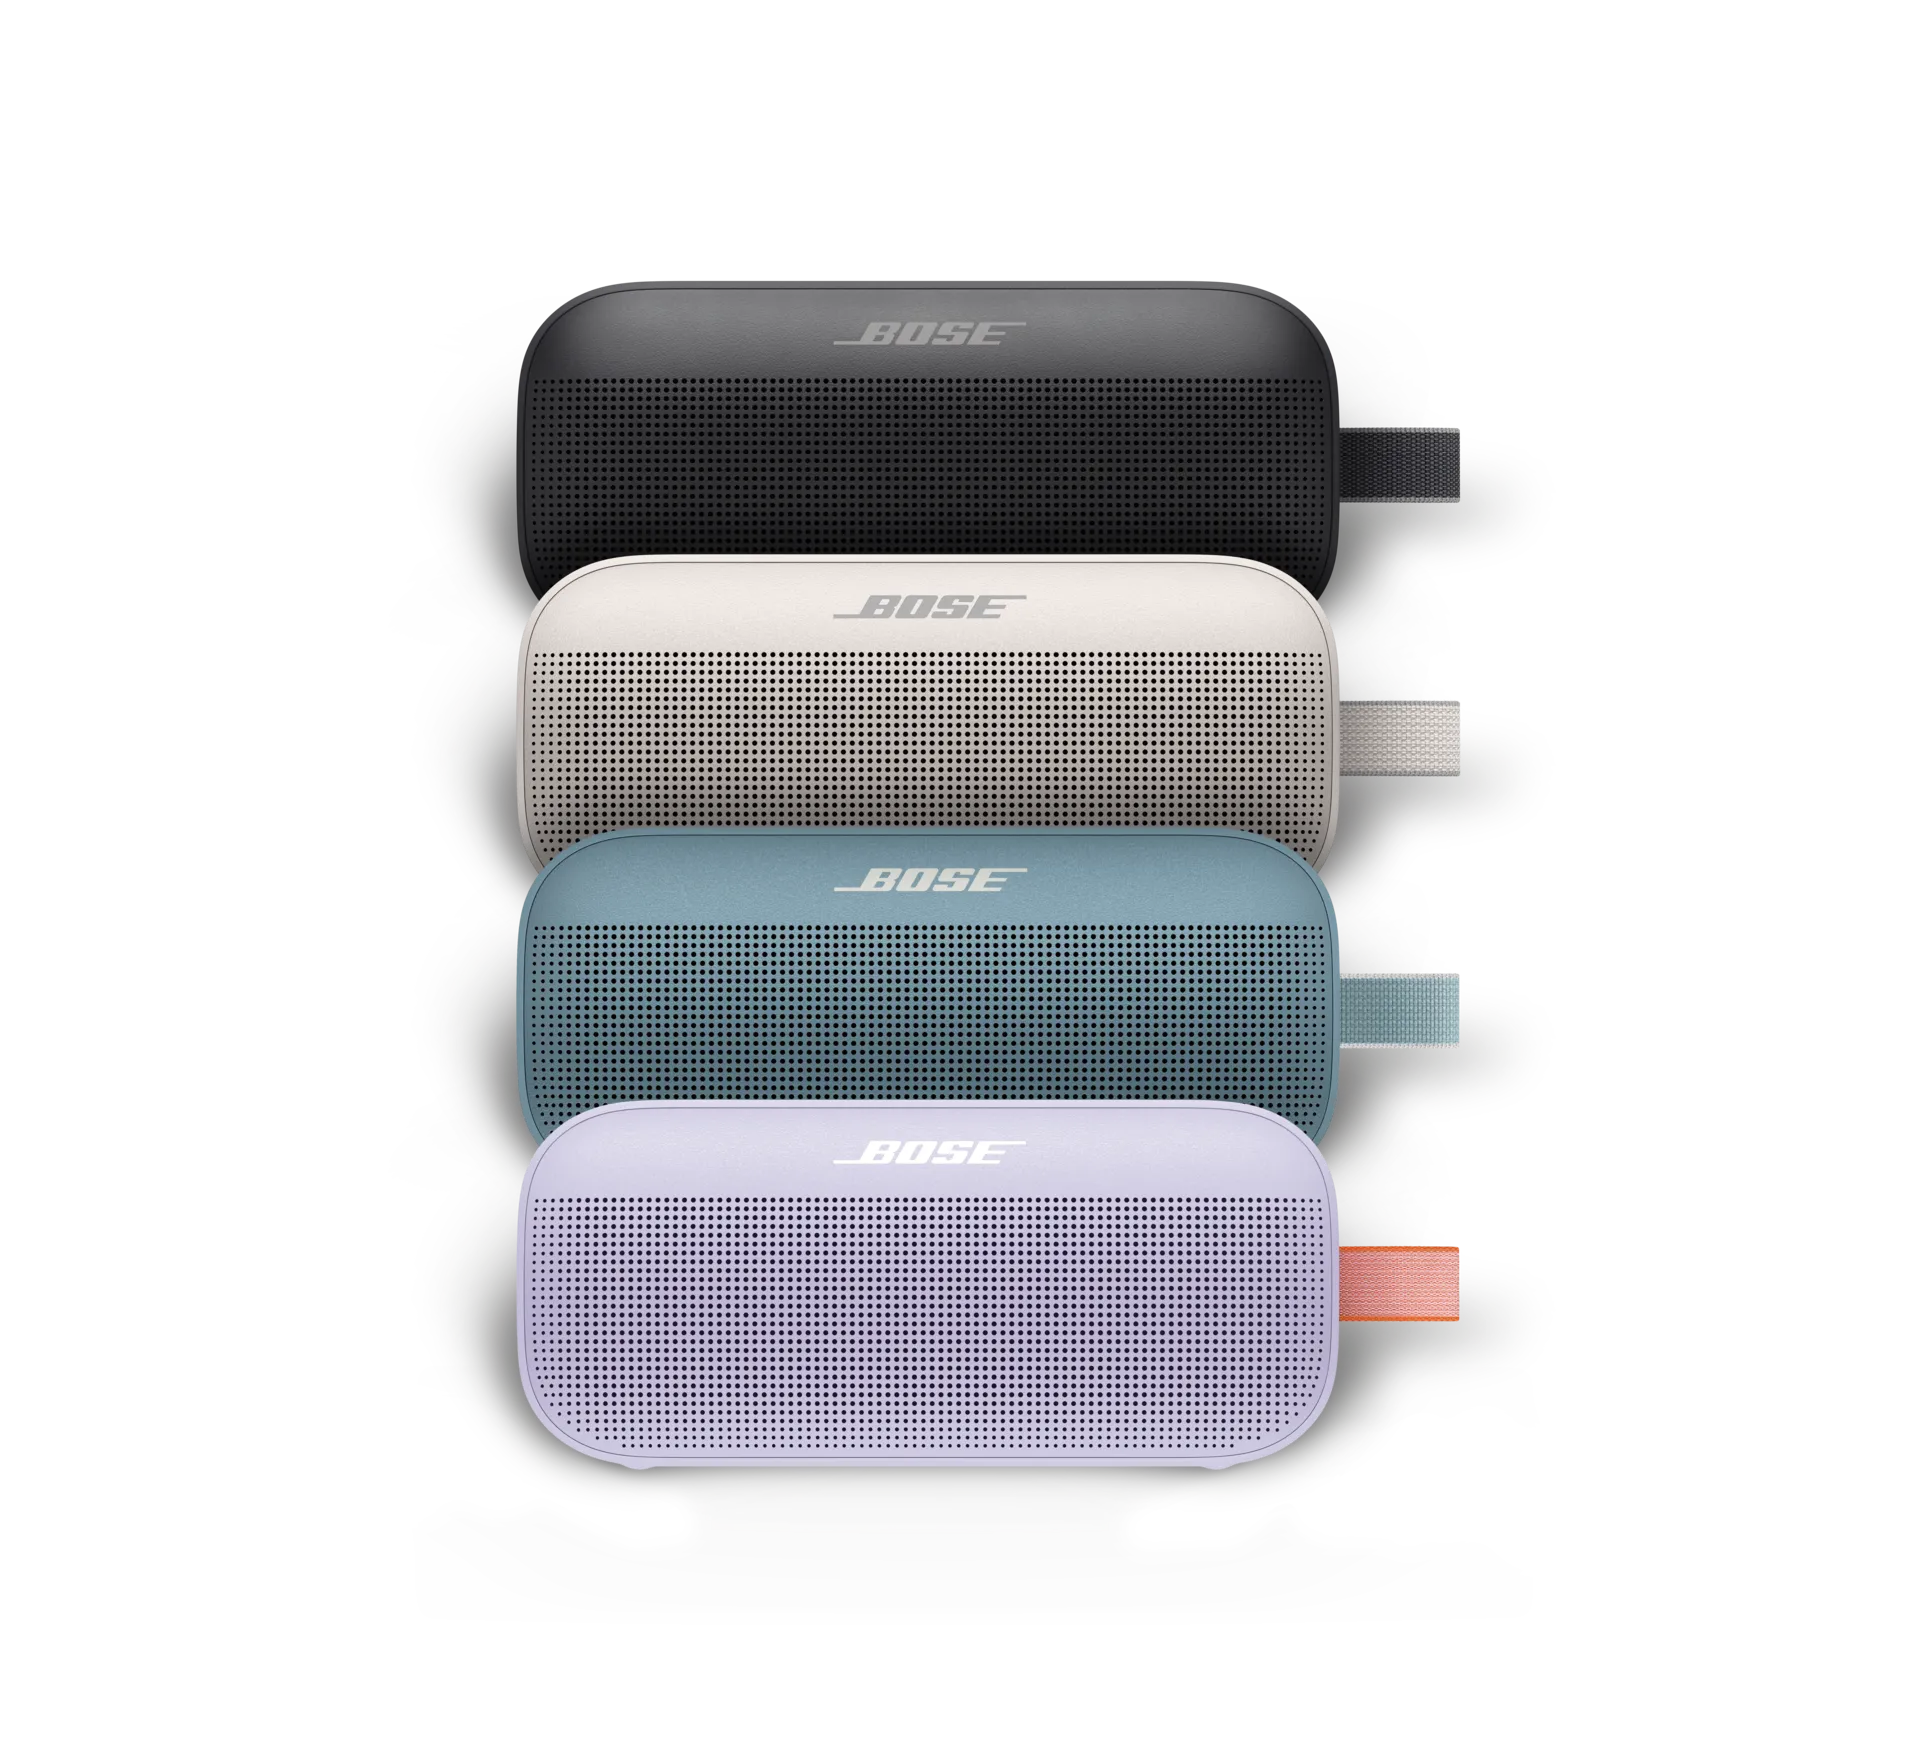 Bose SoundLink Flex Bluetooth Speakers shown in Black, White Smoke, Stone Blue, and Chilled Lilac 